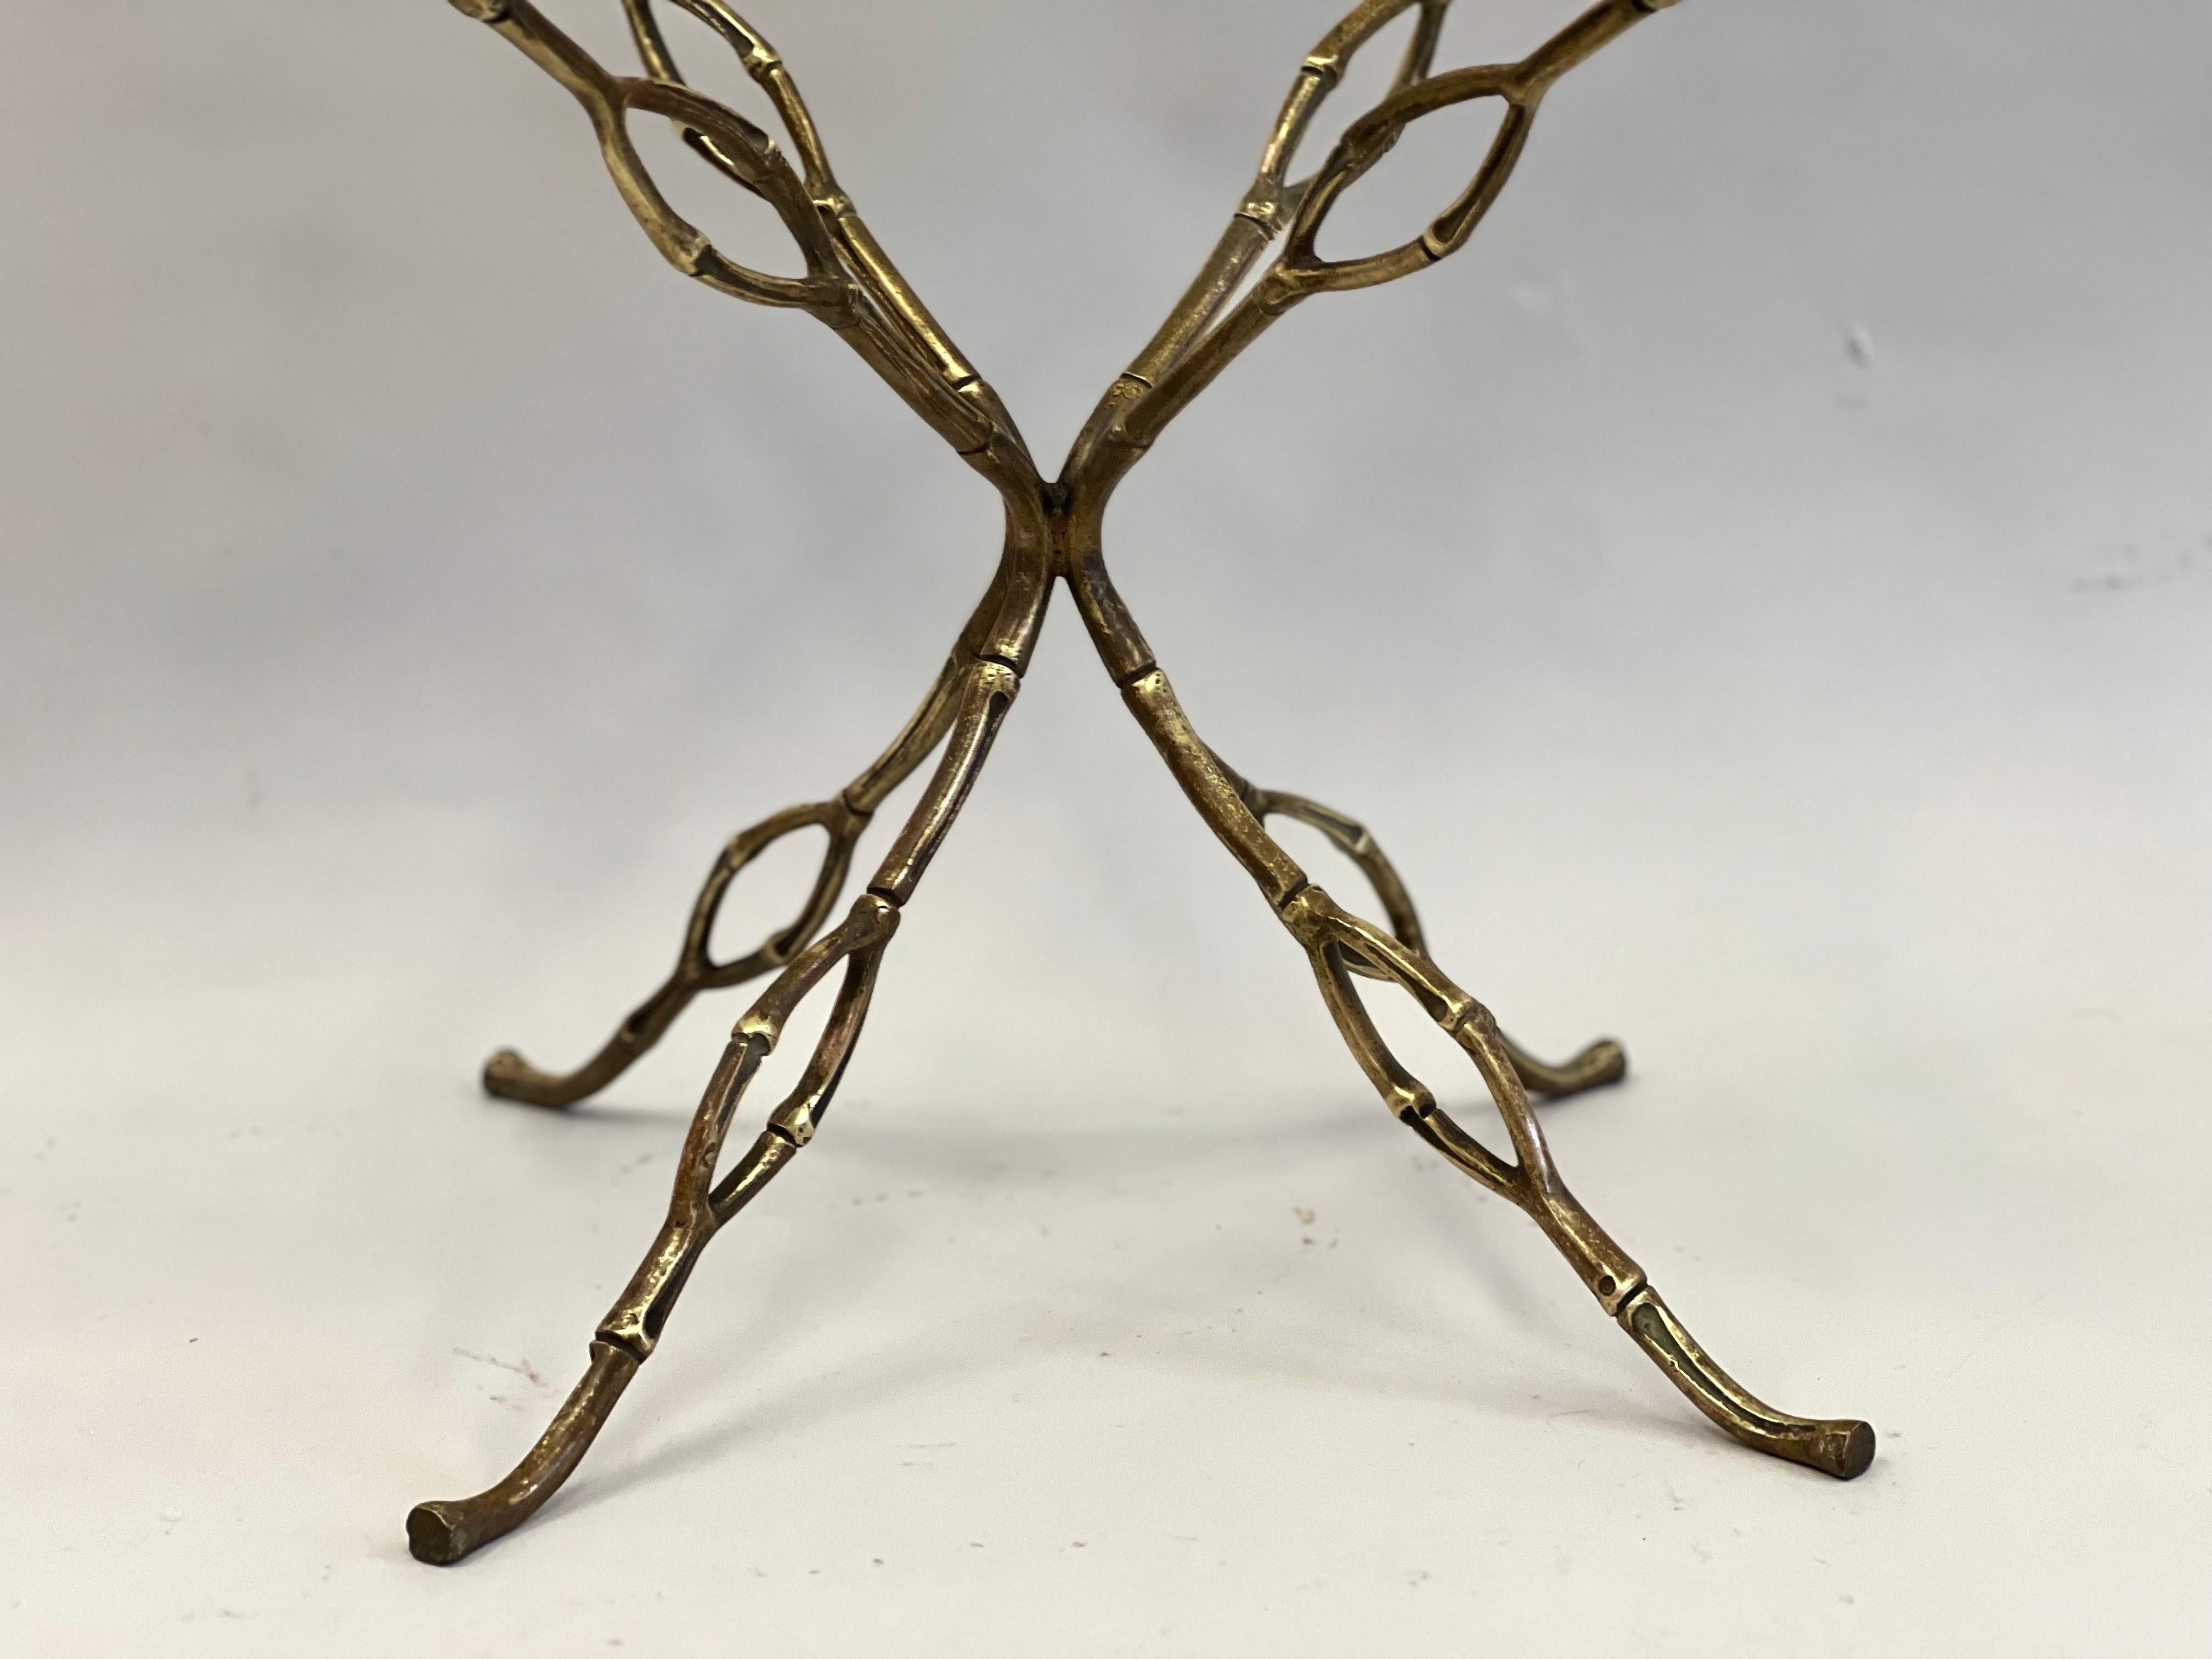 French Modern Craftsman Gilt Bronze Side or Coffee Table in style of Giacometti  For Sale 2